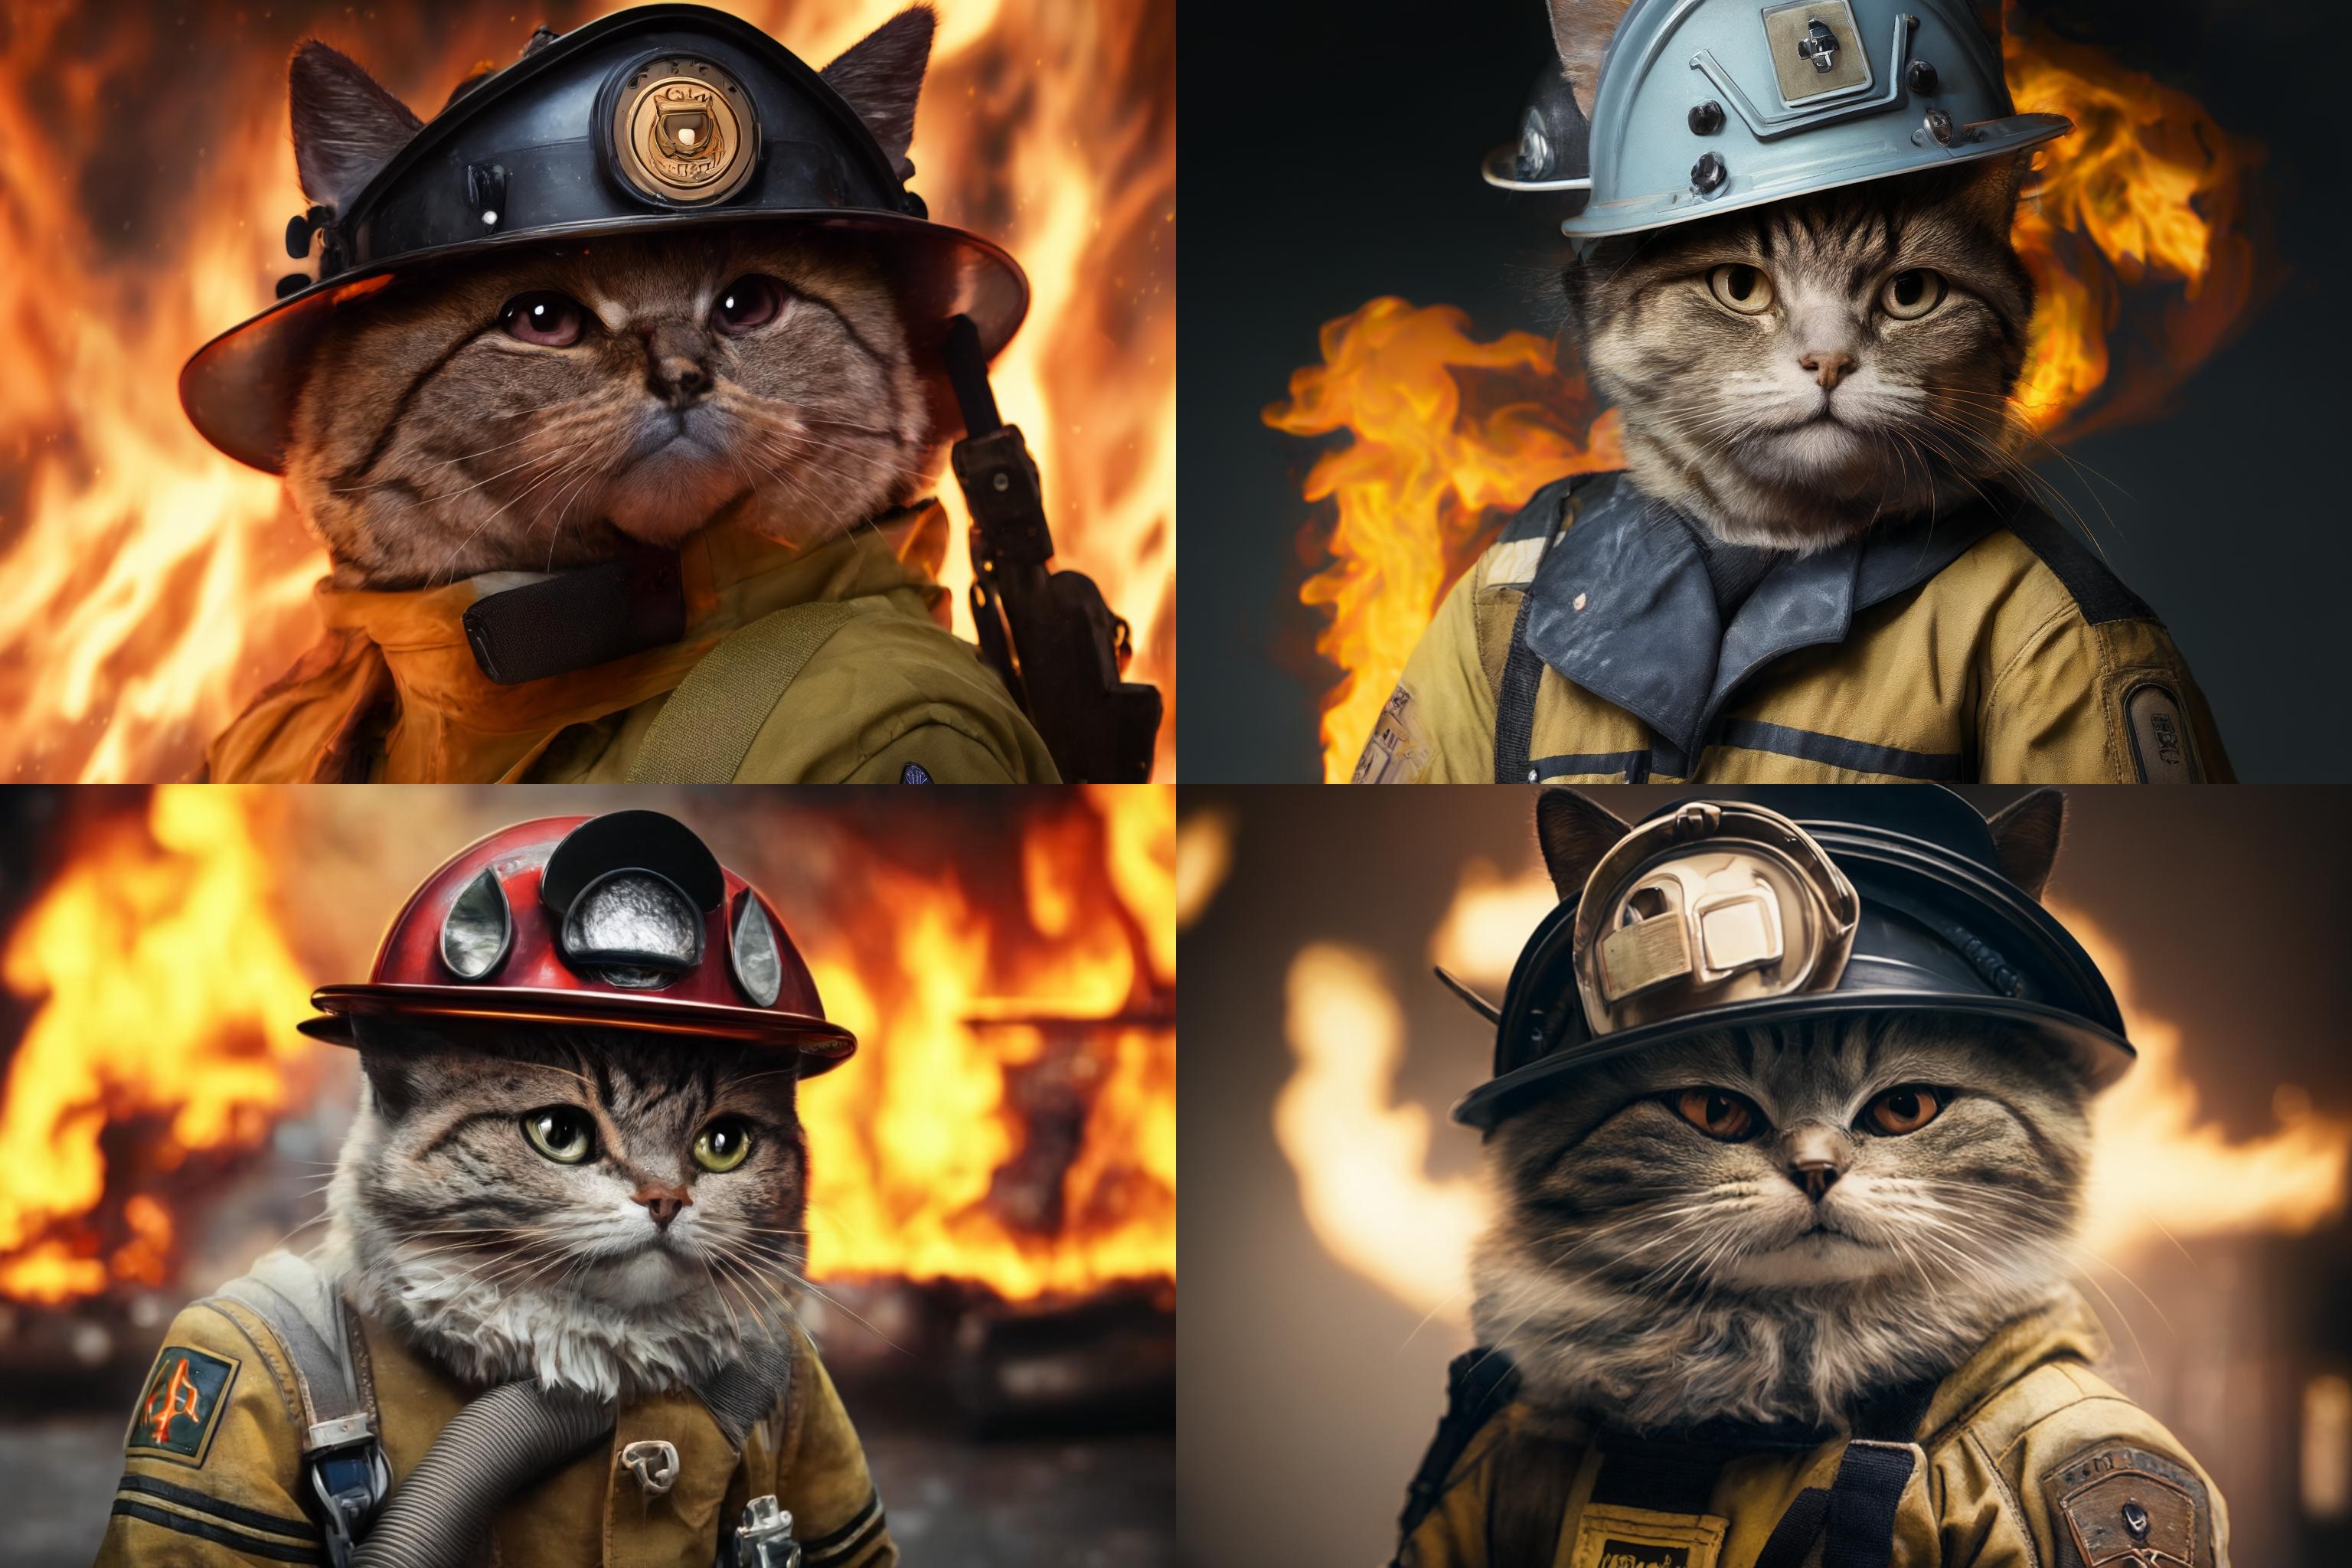 Anthropomorphic cat dressed as a fire-fighter